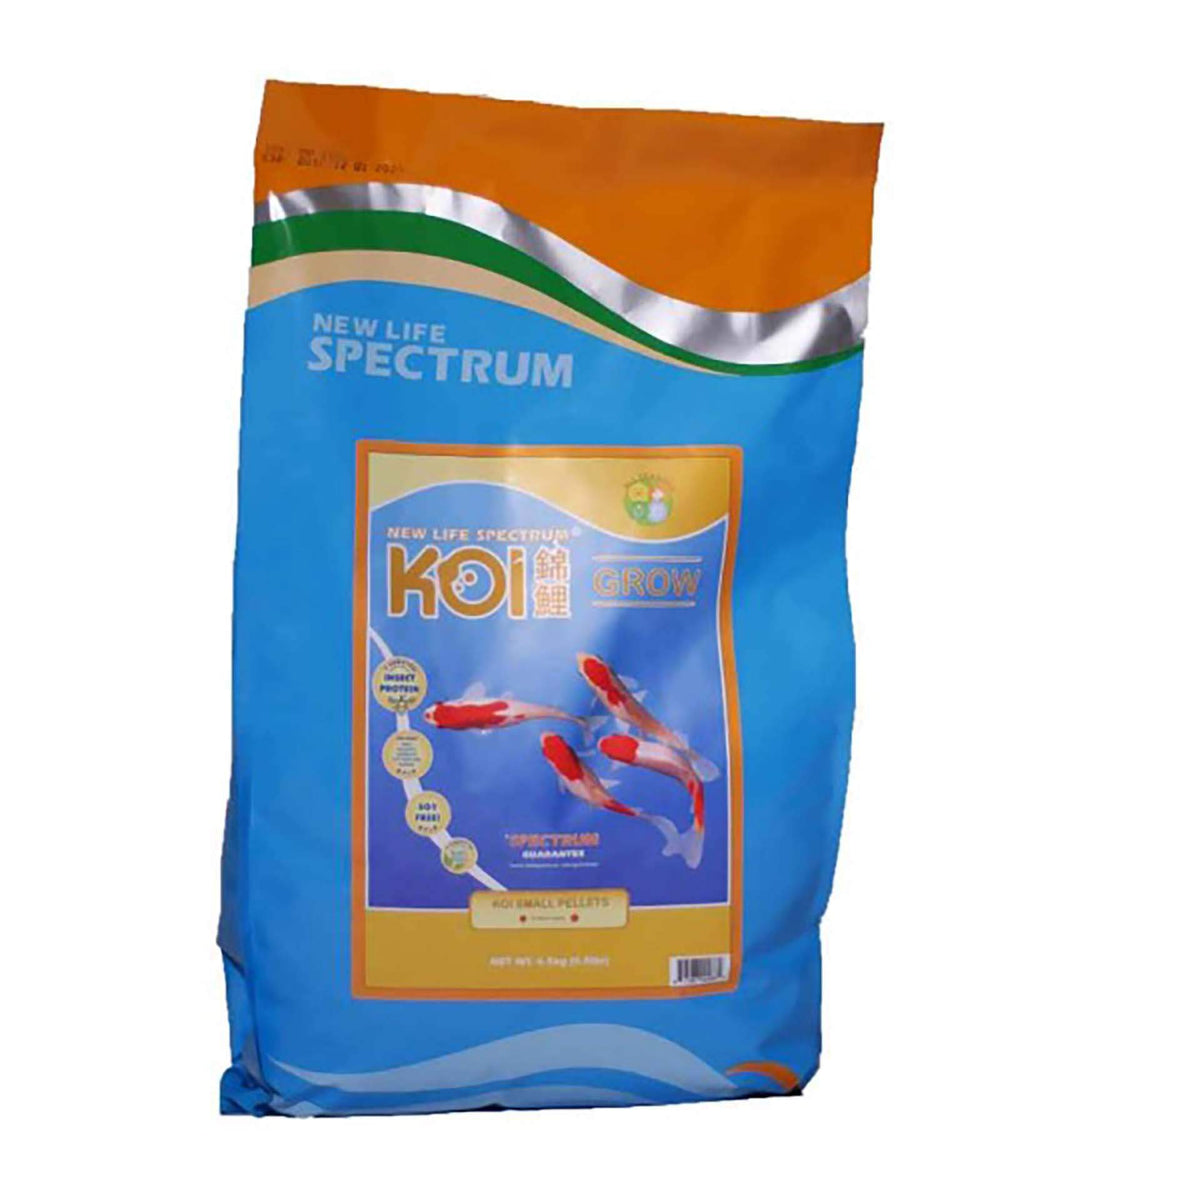 New Life Spectrum Koi Grow with Insect Protein 4.5kg - Pellet 3.5-4mm